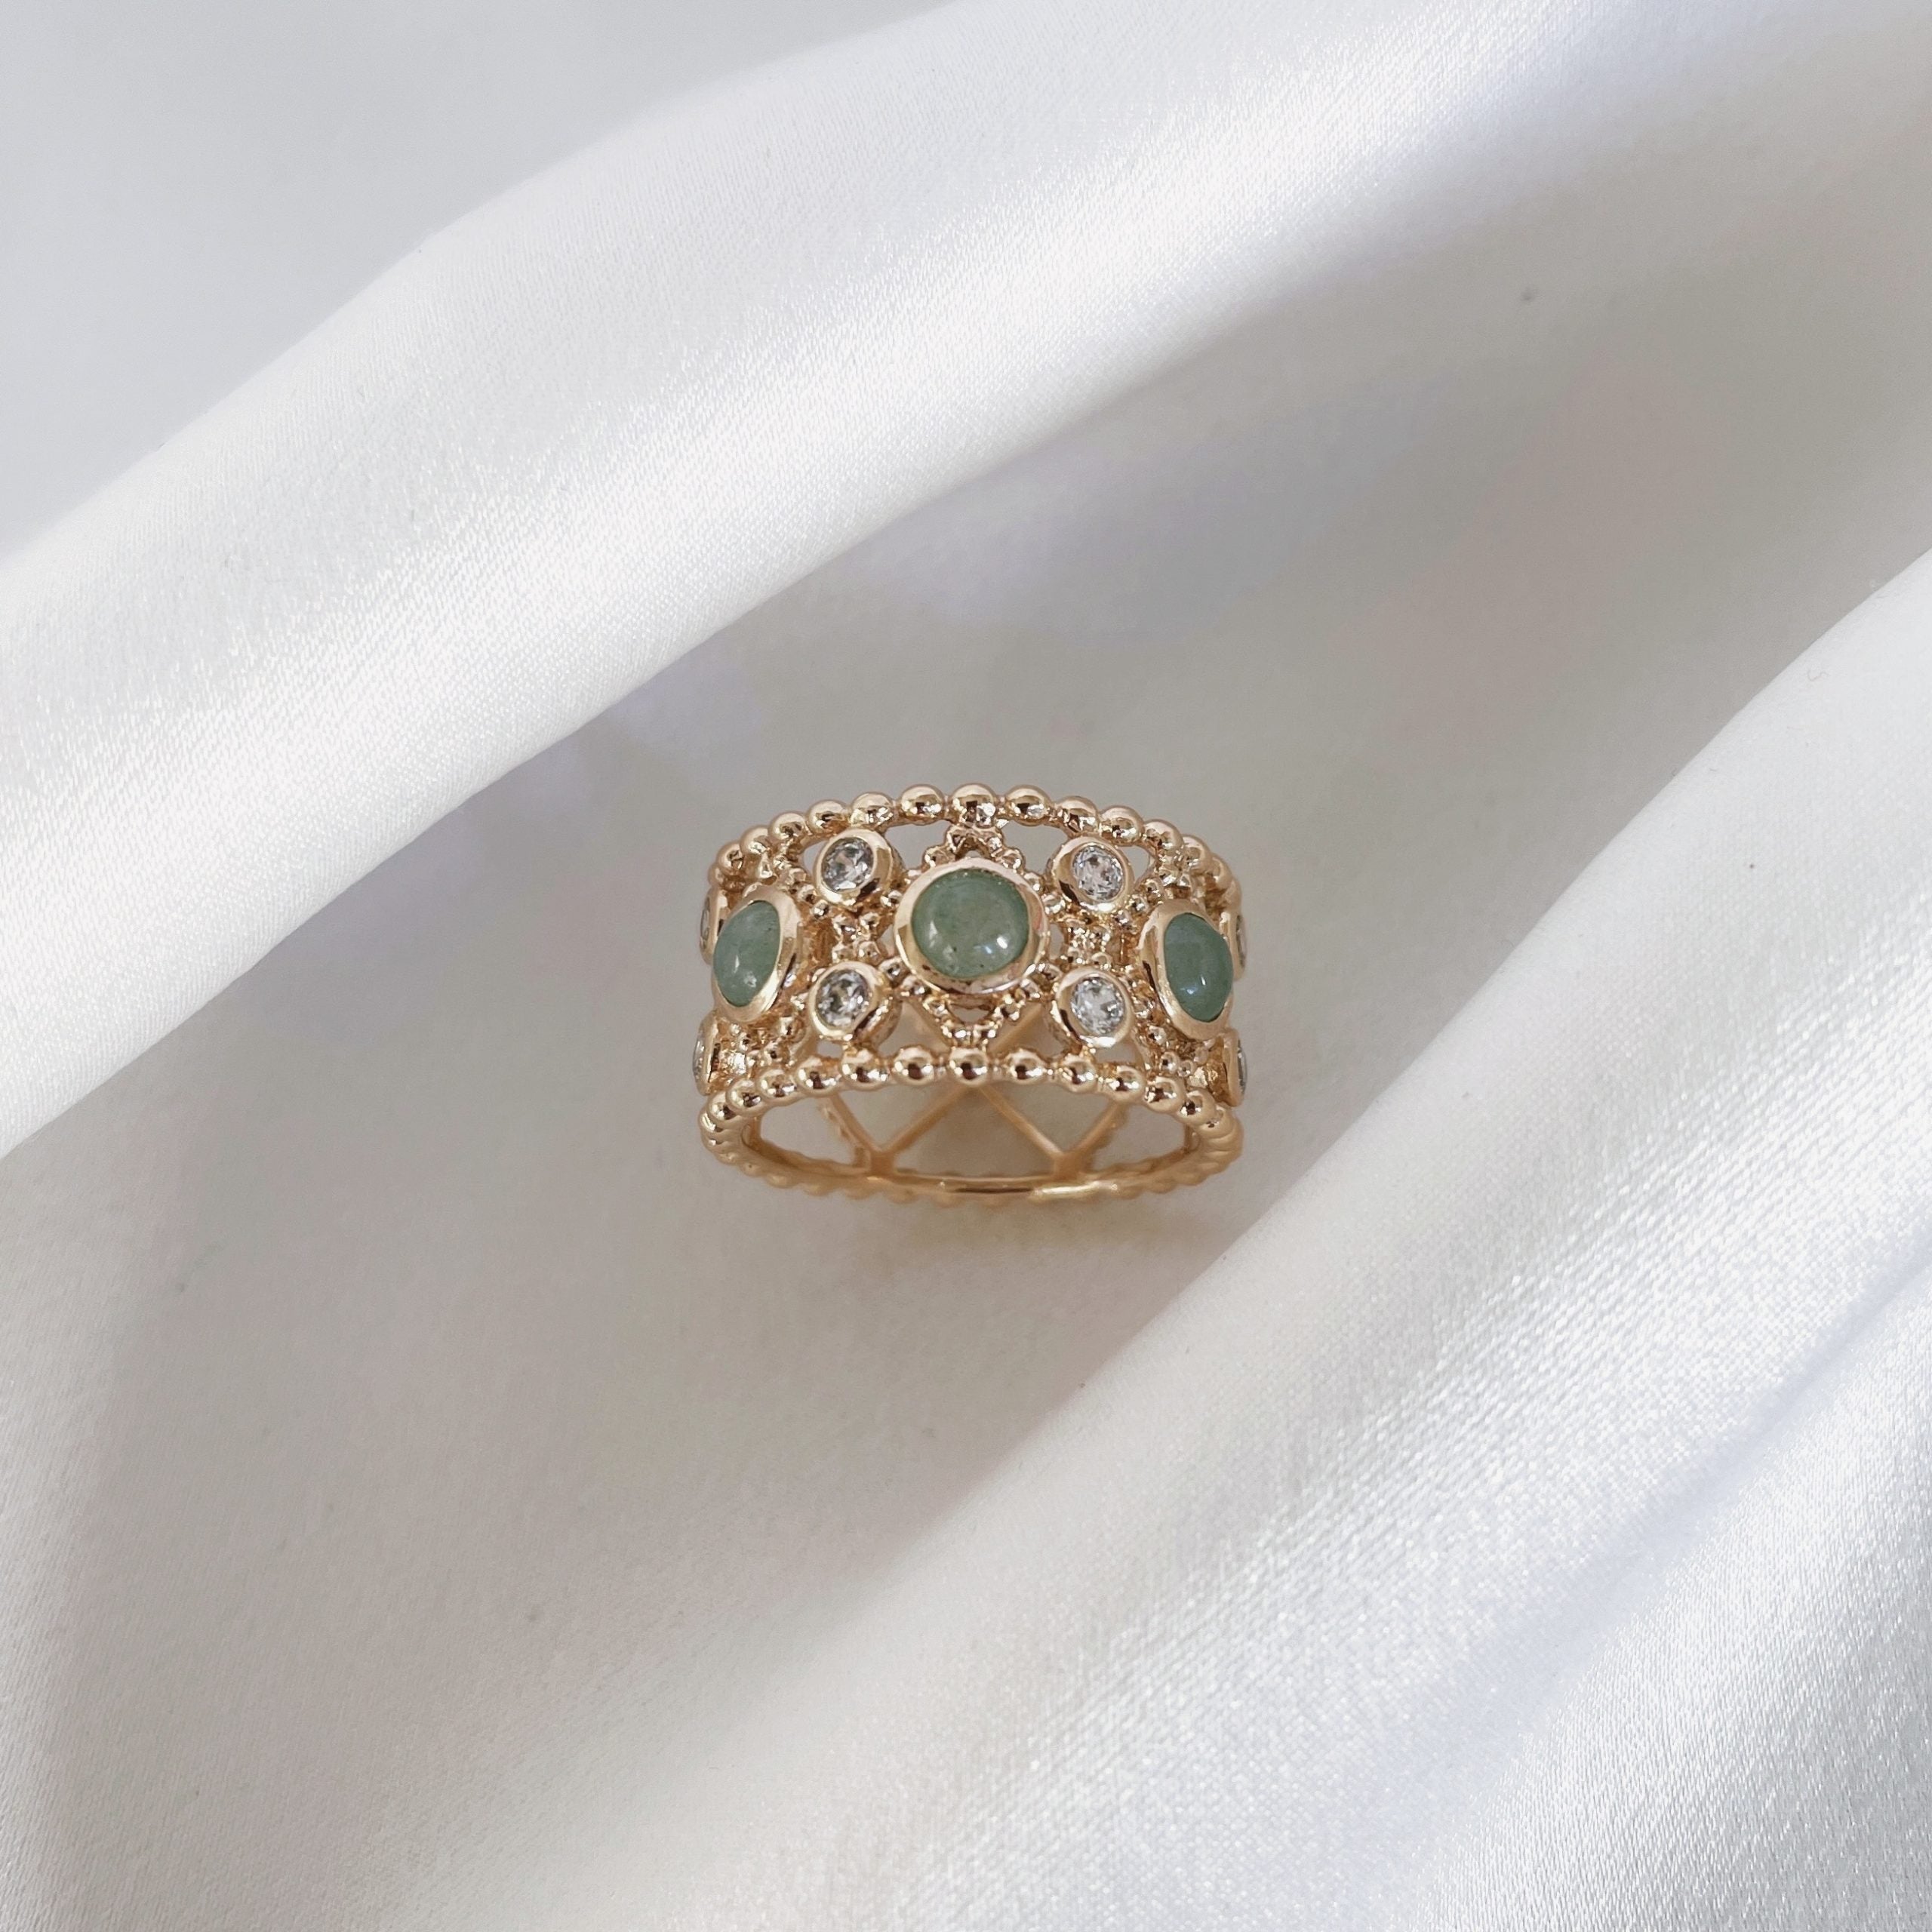 Gold-plated “Chloe” ring